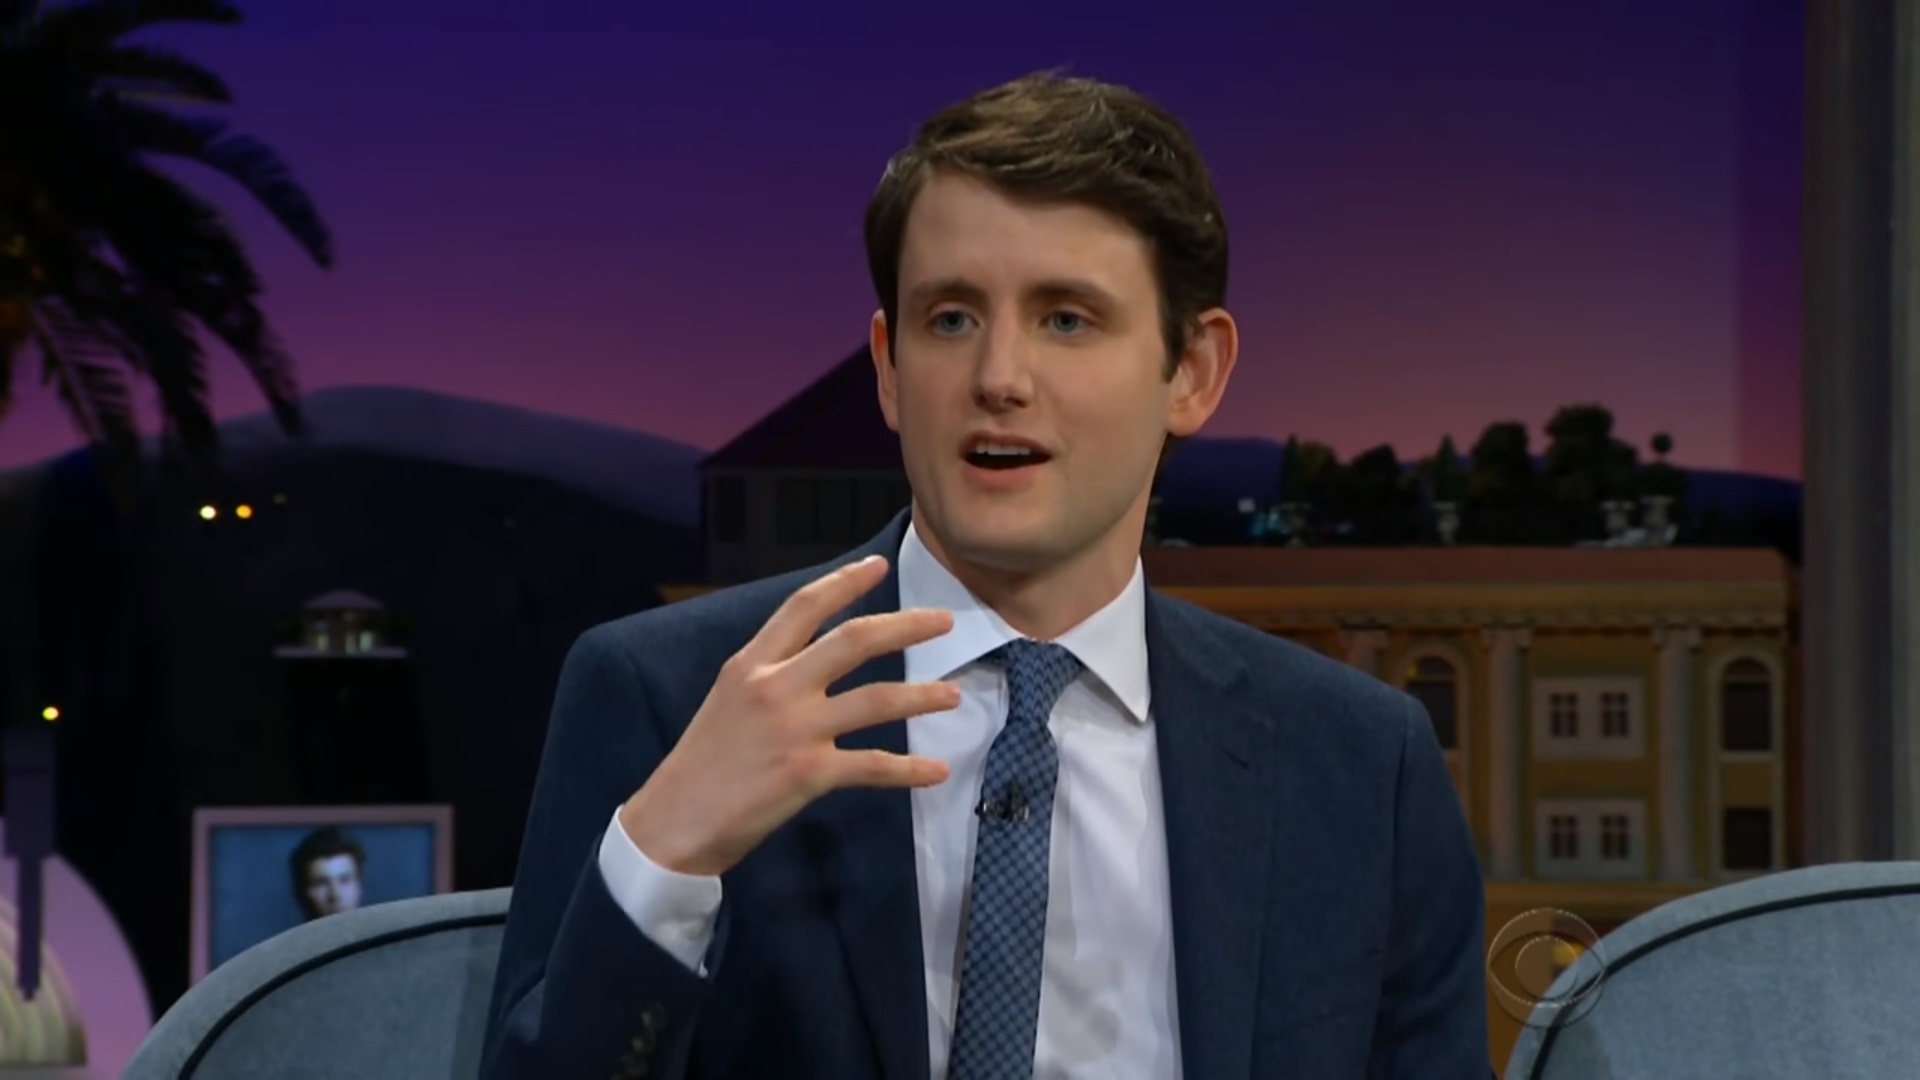 aj eberly recommends zach woods naked pic